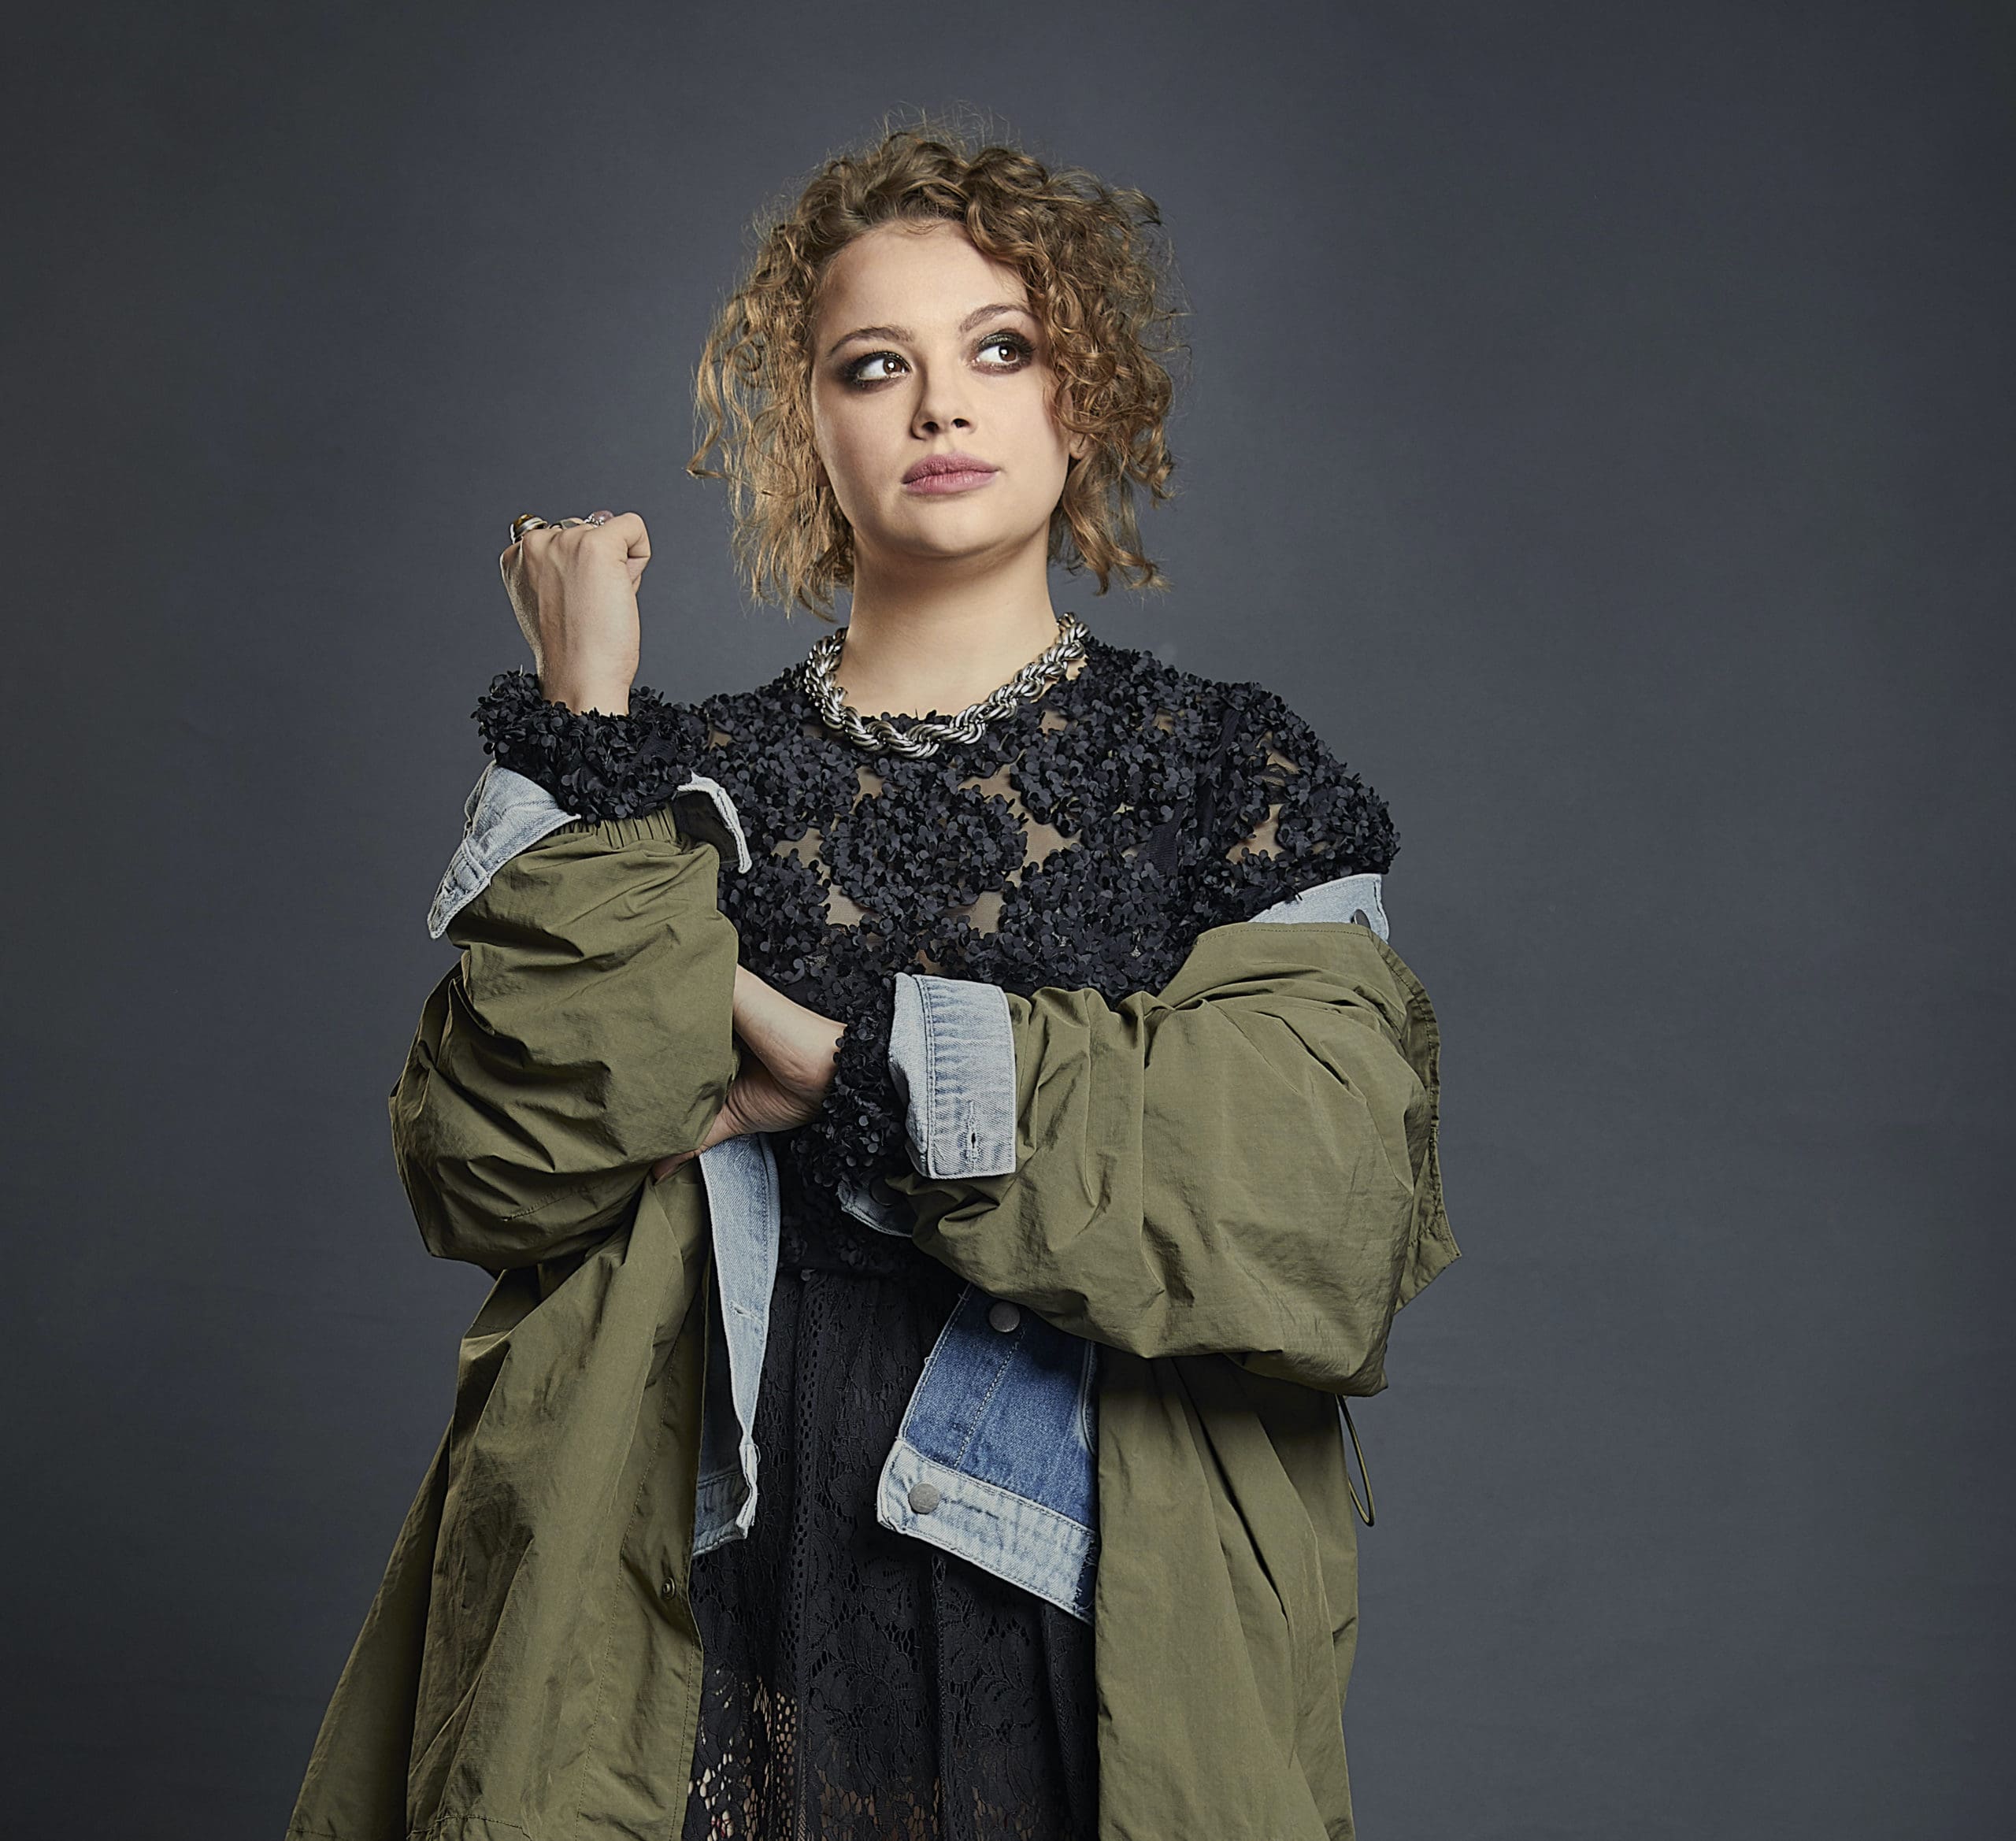 NEWS: Carrie Hope Fletcher will play Cinderella in Andrew Lloyd Webber’s highly anticipated new production